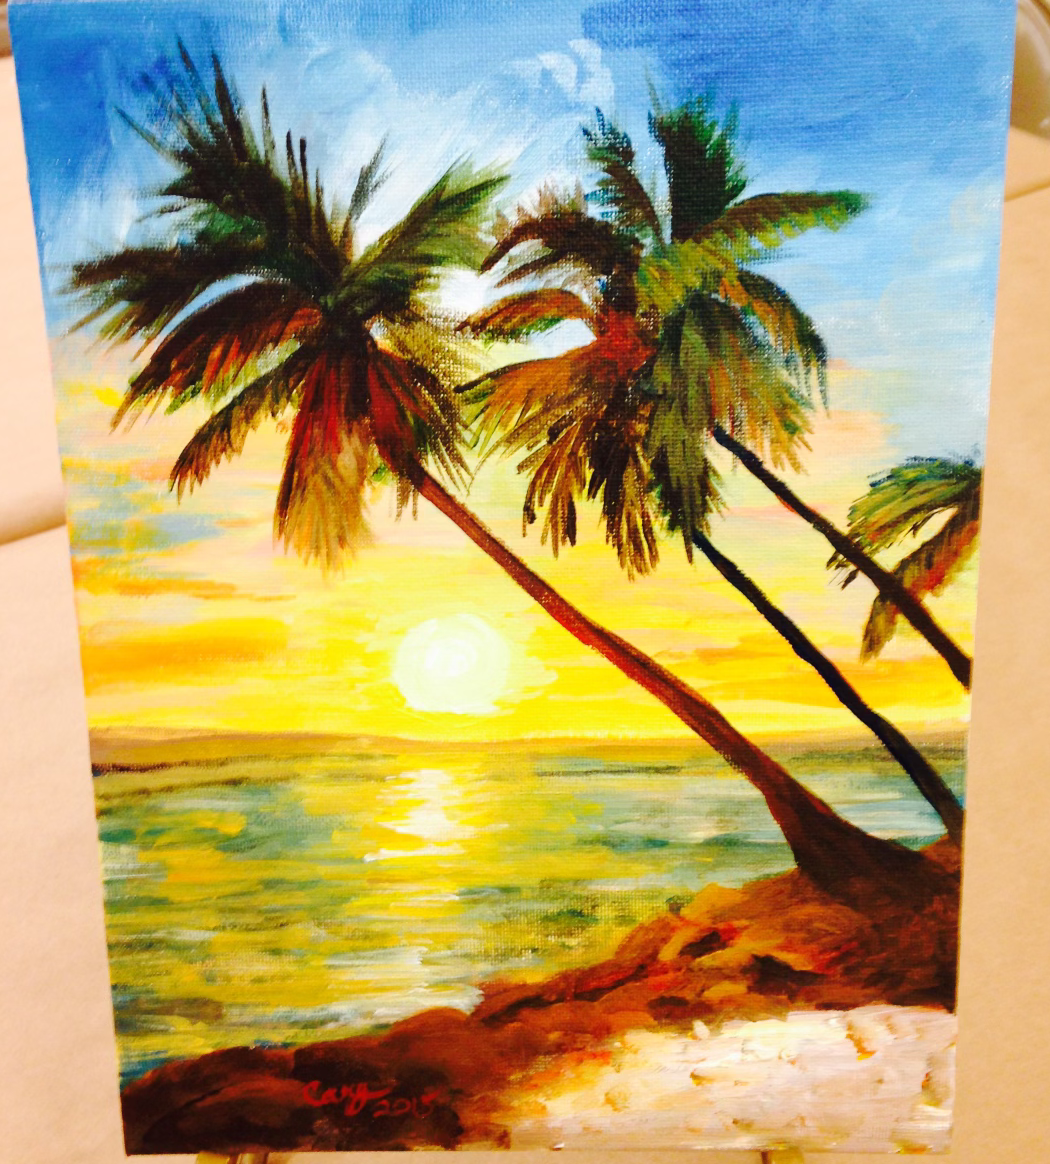 A painting featuring a beach and palm trees in the foreground and the sun setting over the ocean in the background.